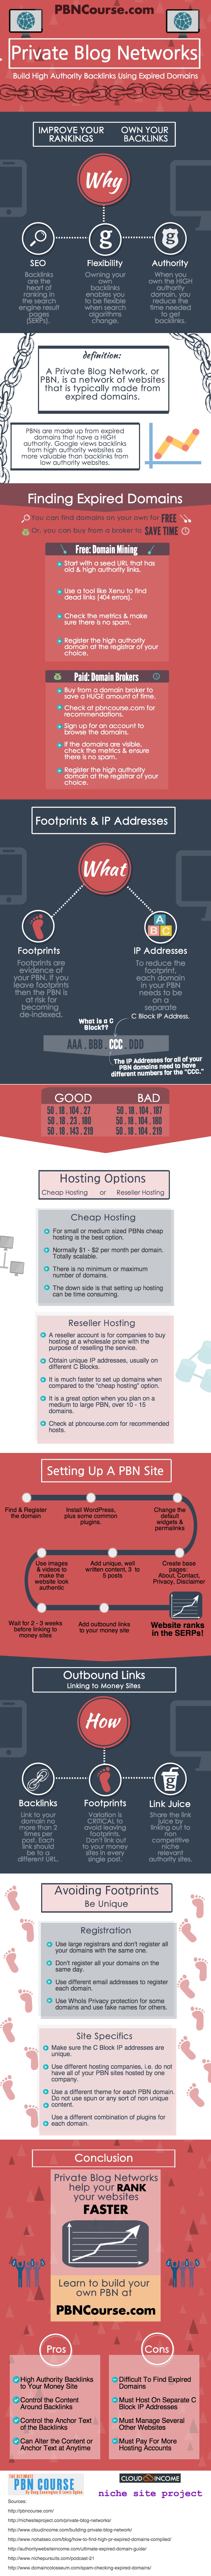 ultimate-private-blog-network-infographic what is PBN hosting